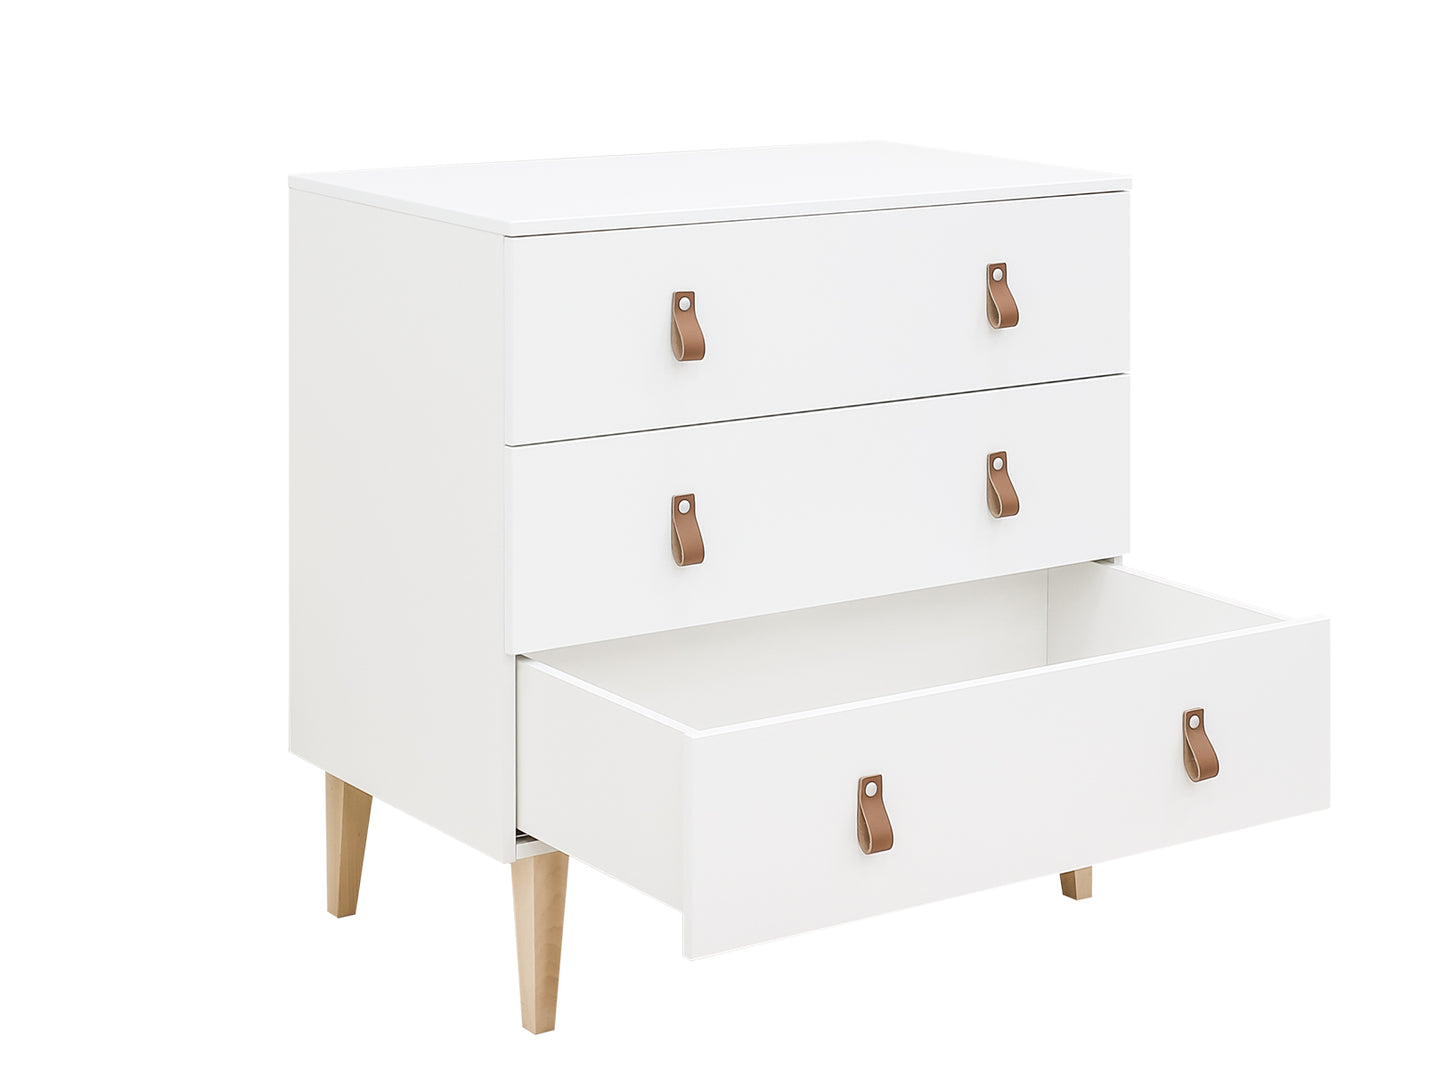 Bopita Indy dresser with 3 drawers - White/Natural